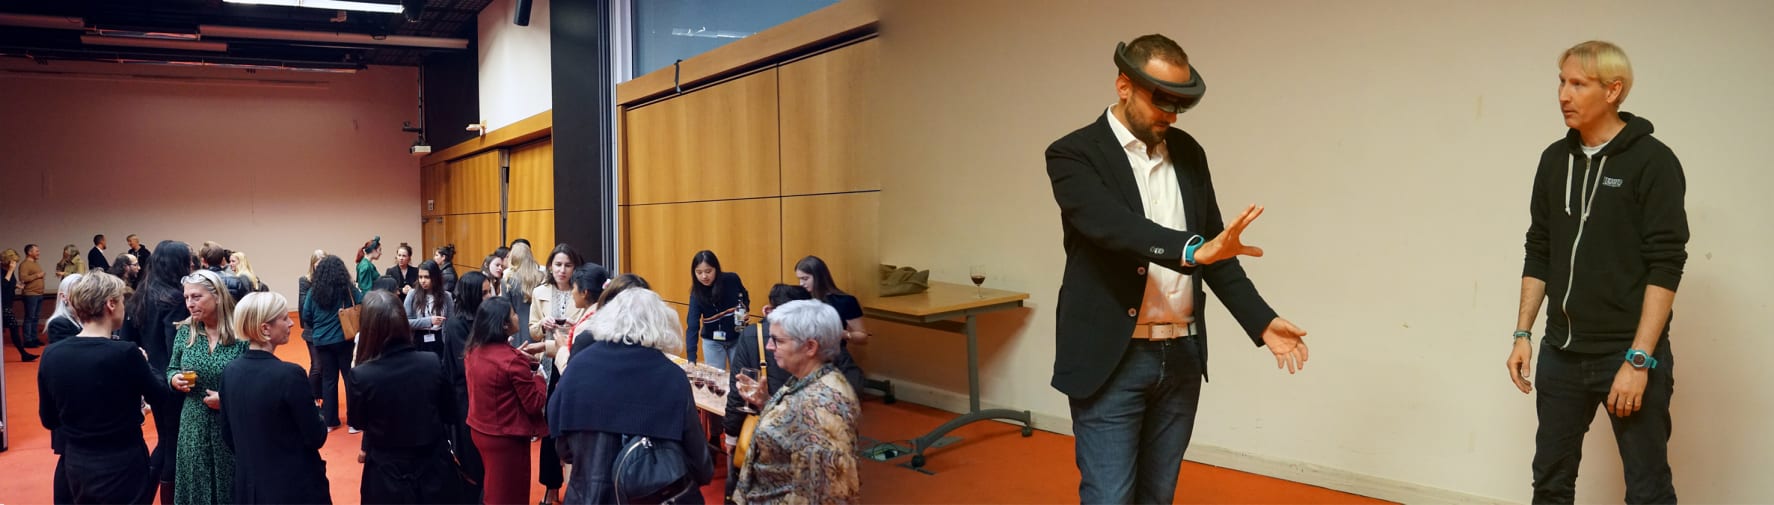 Image of people networking and with matthew drinkwater using virtual reality